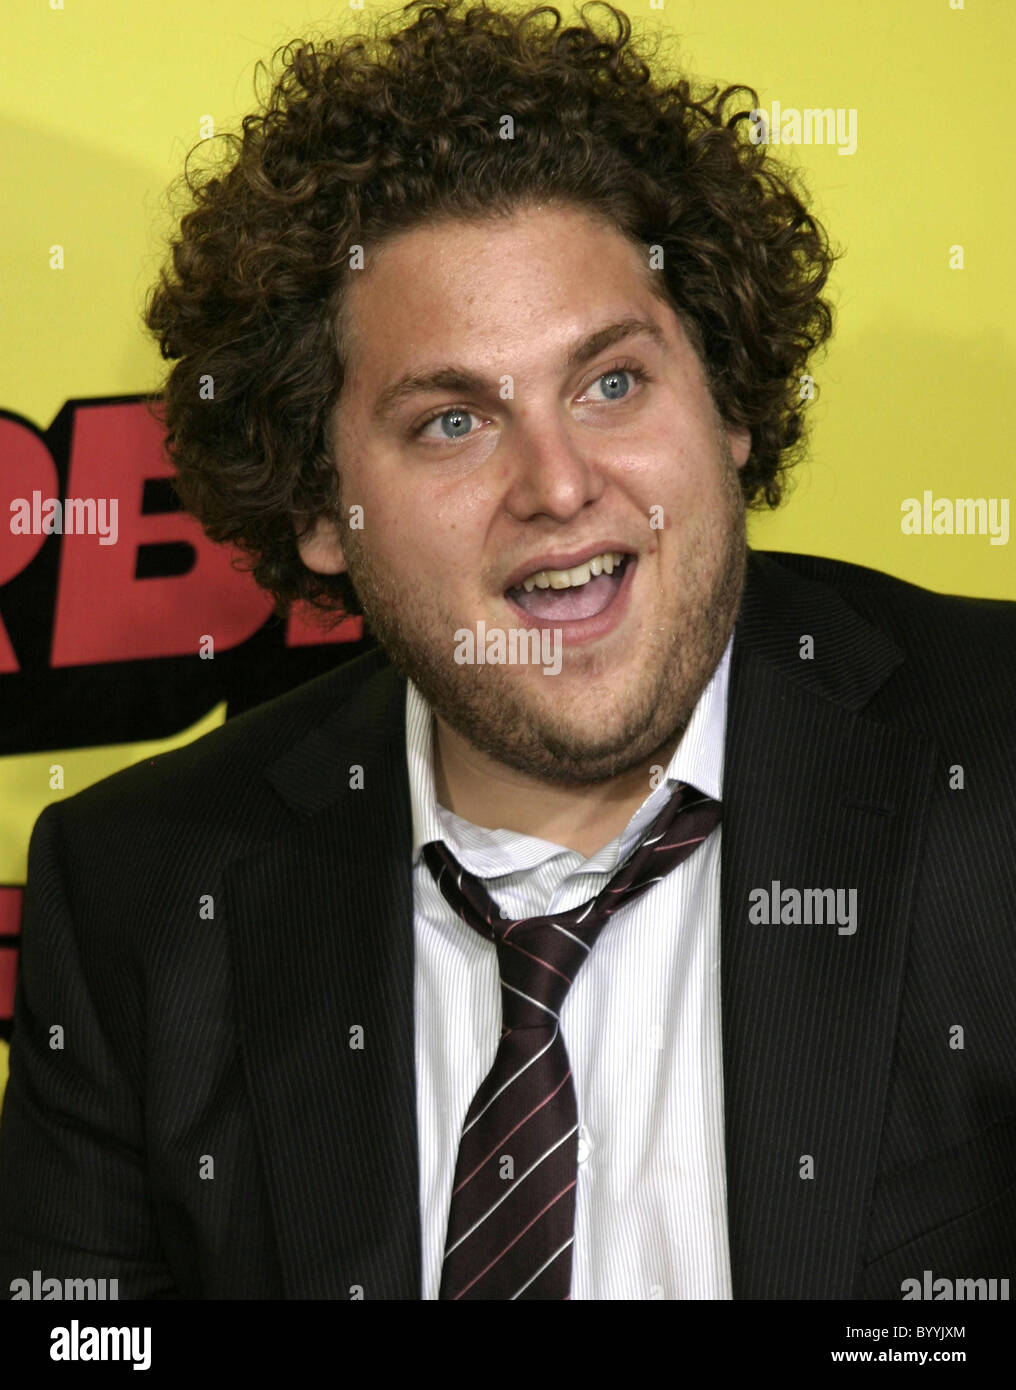 Superbad' premiere chock-full of comedic superstars - Los Angeles Times